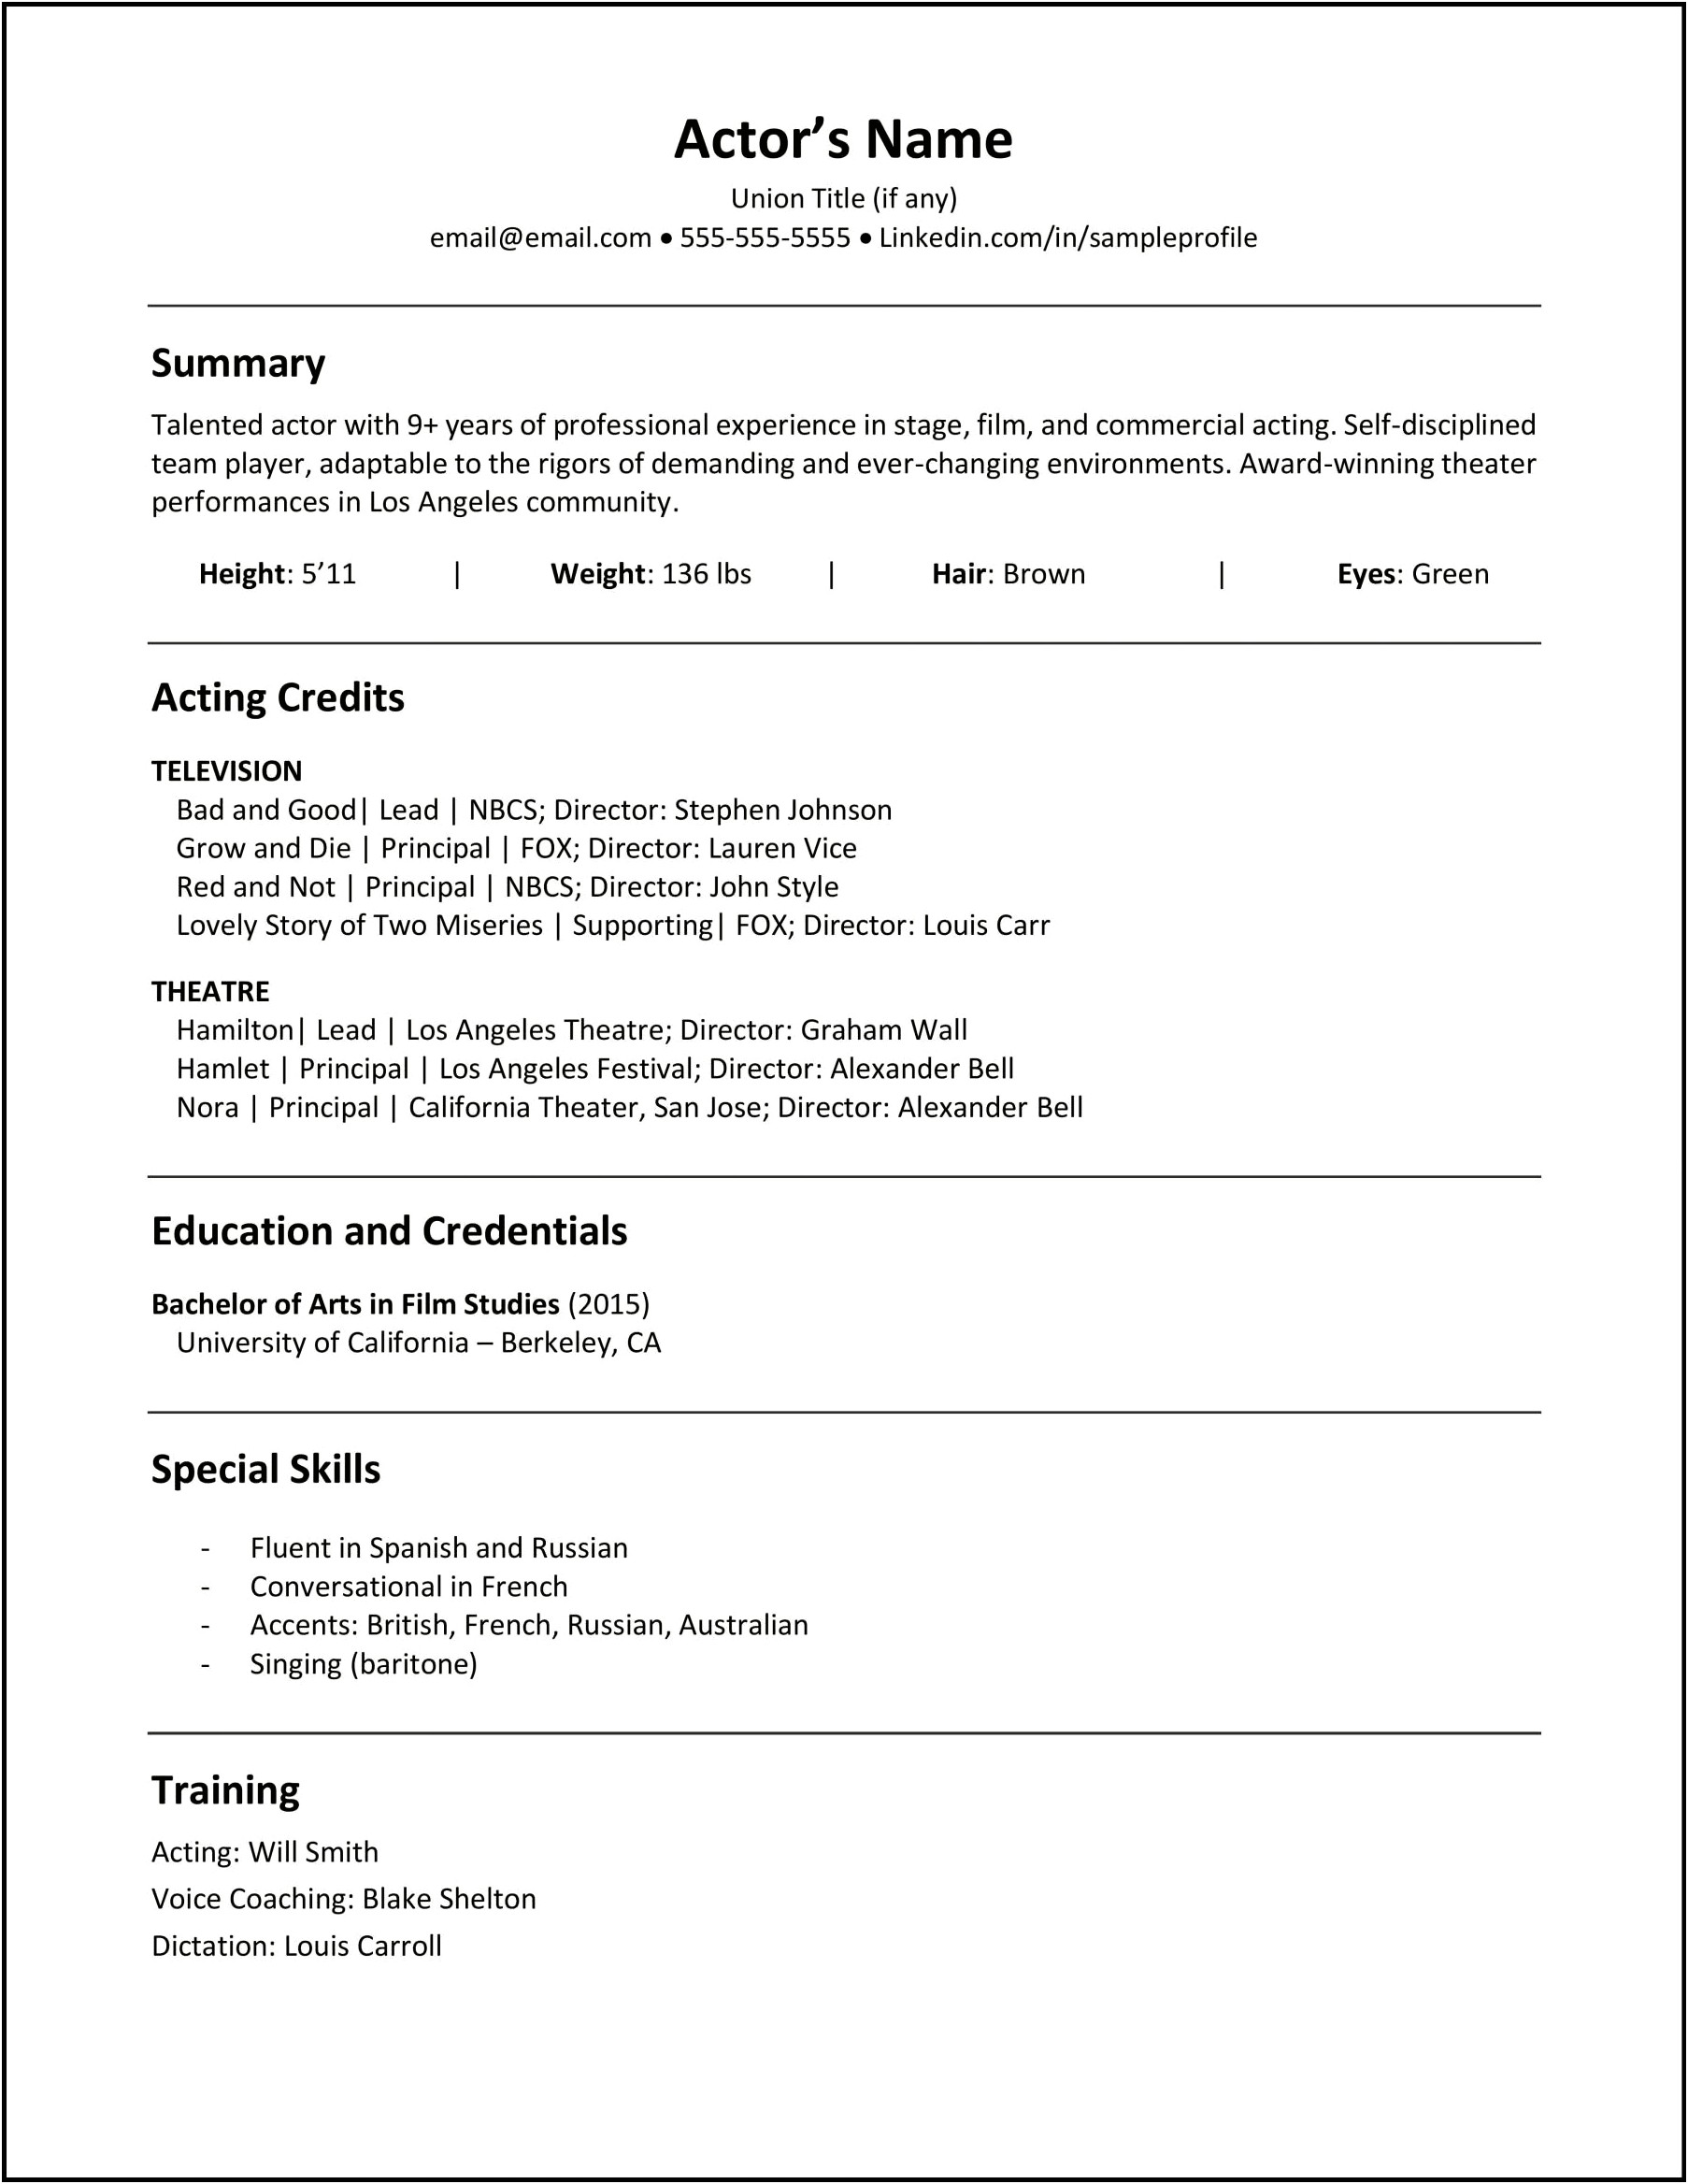 Examples Of Special Skills On Acting Resume